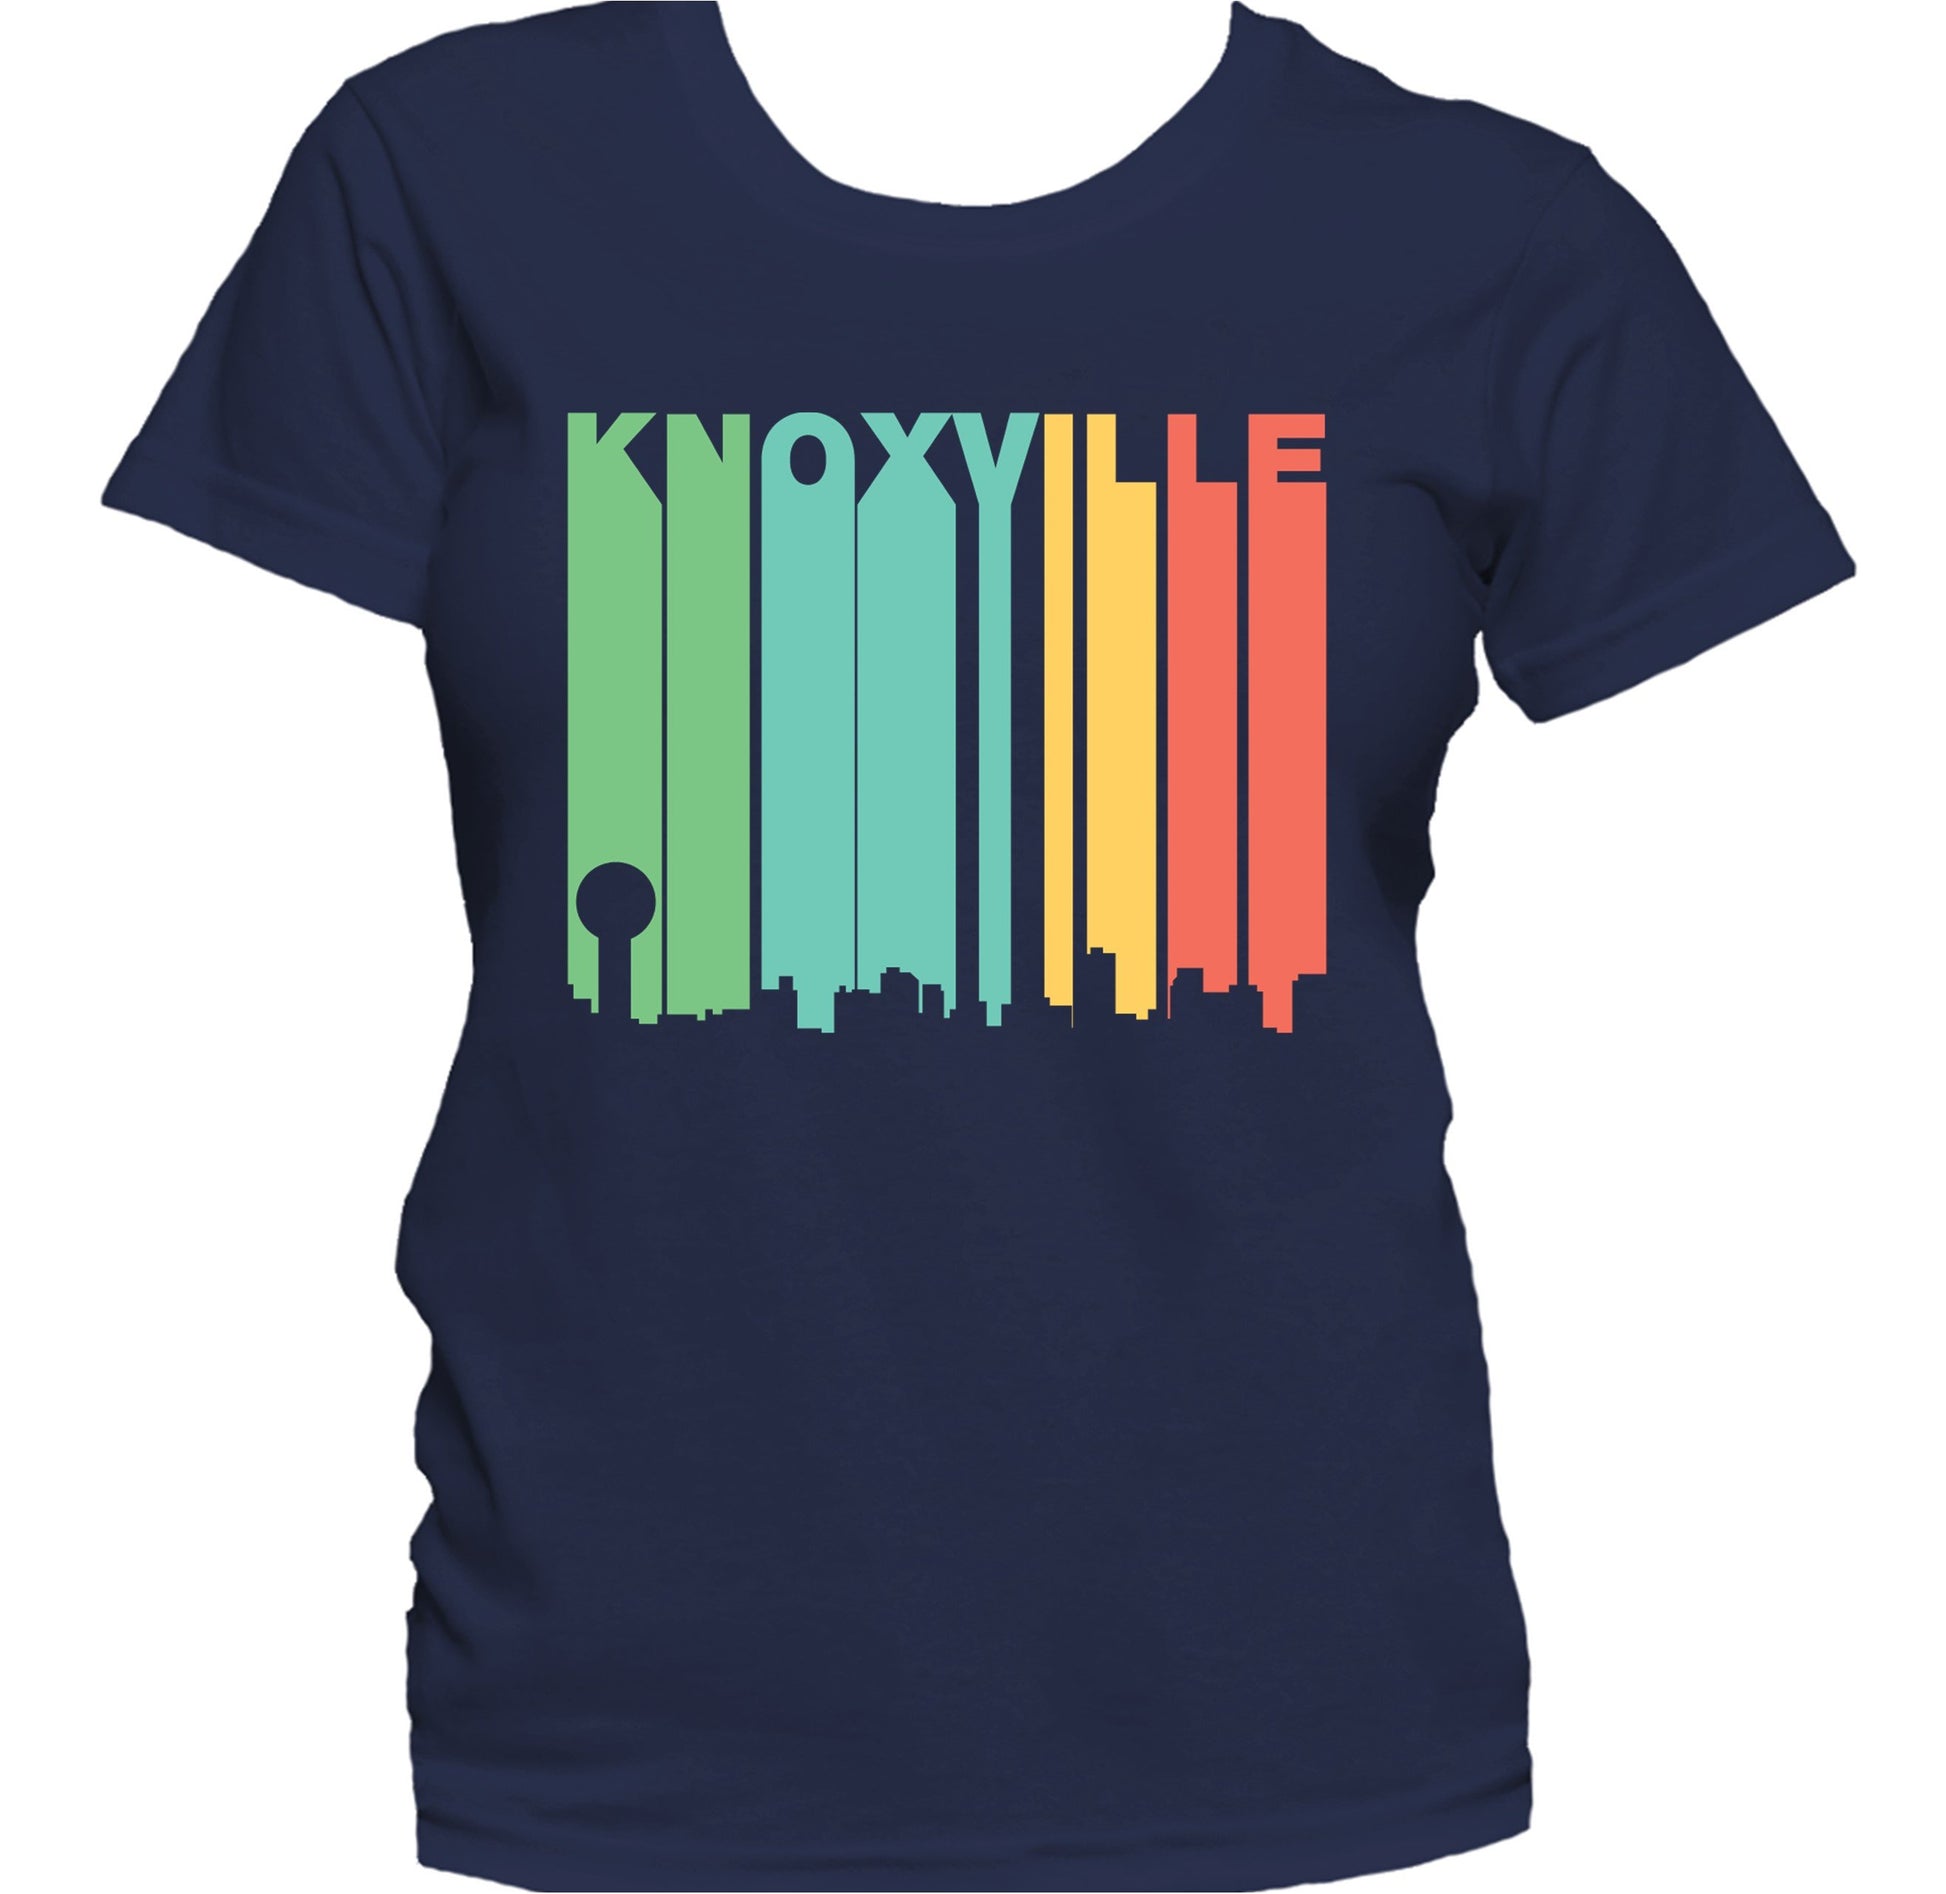 Retro 1970's Style Knoxville Tennessee Skyline Women's T-Shirt